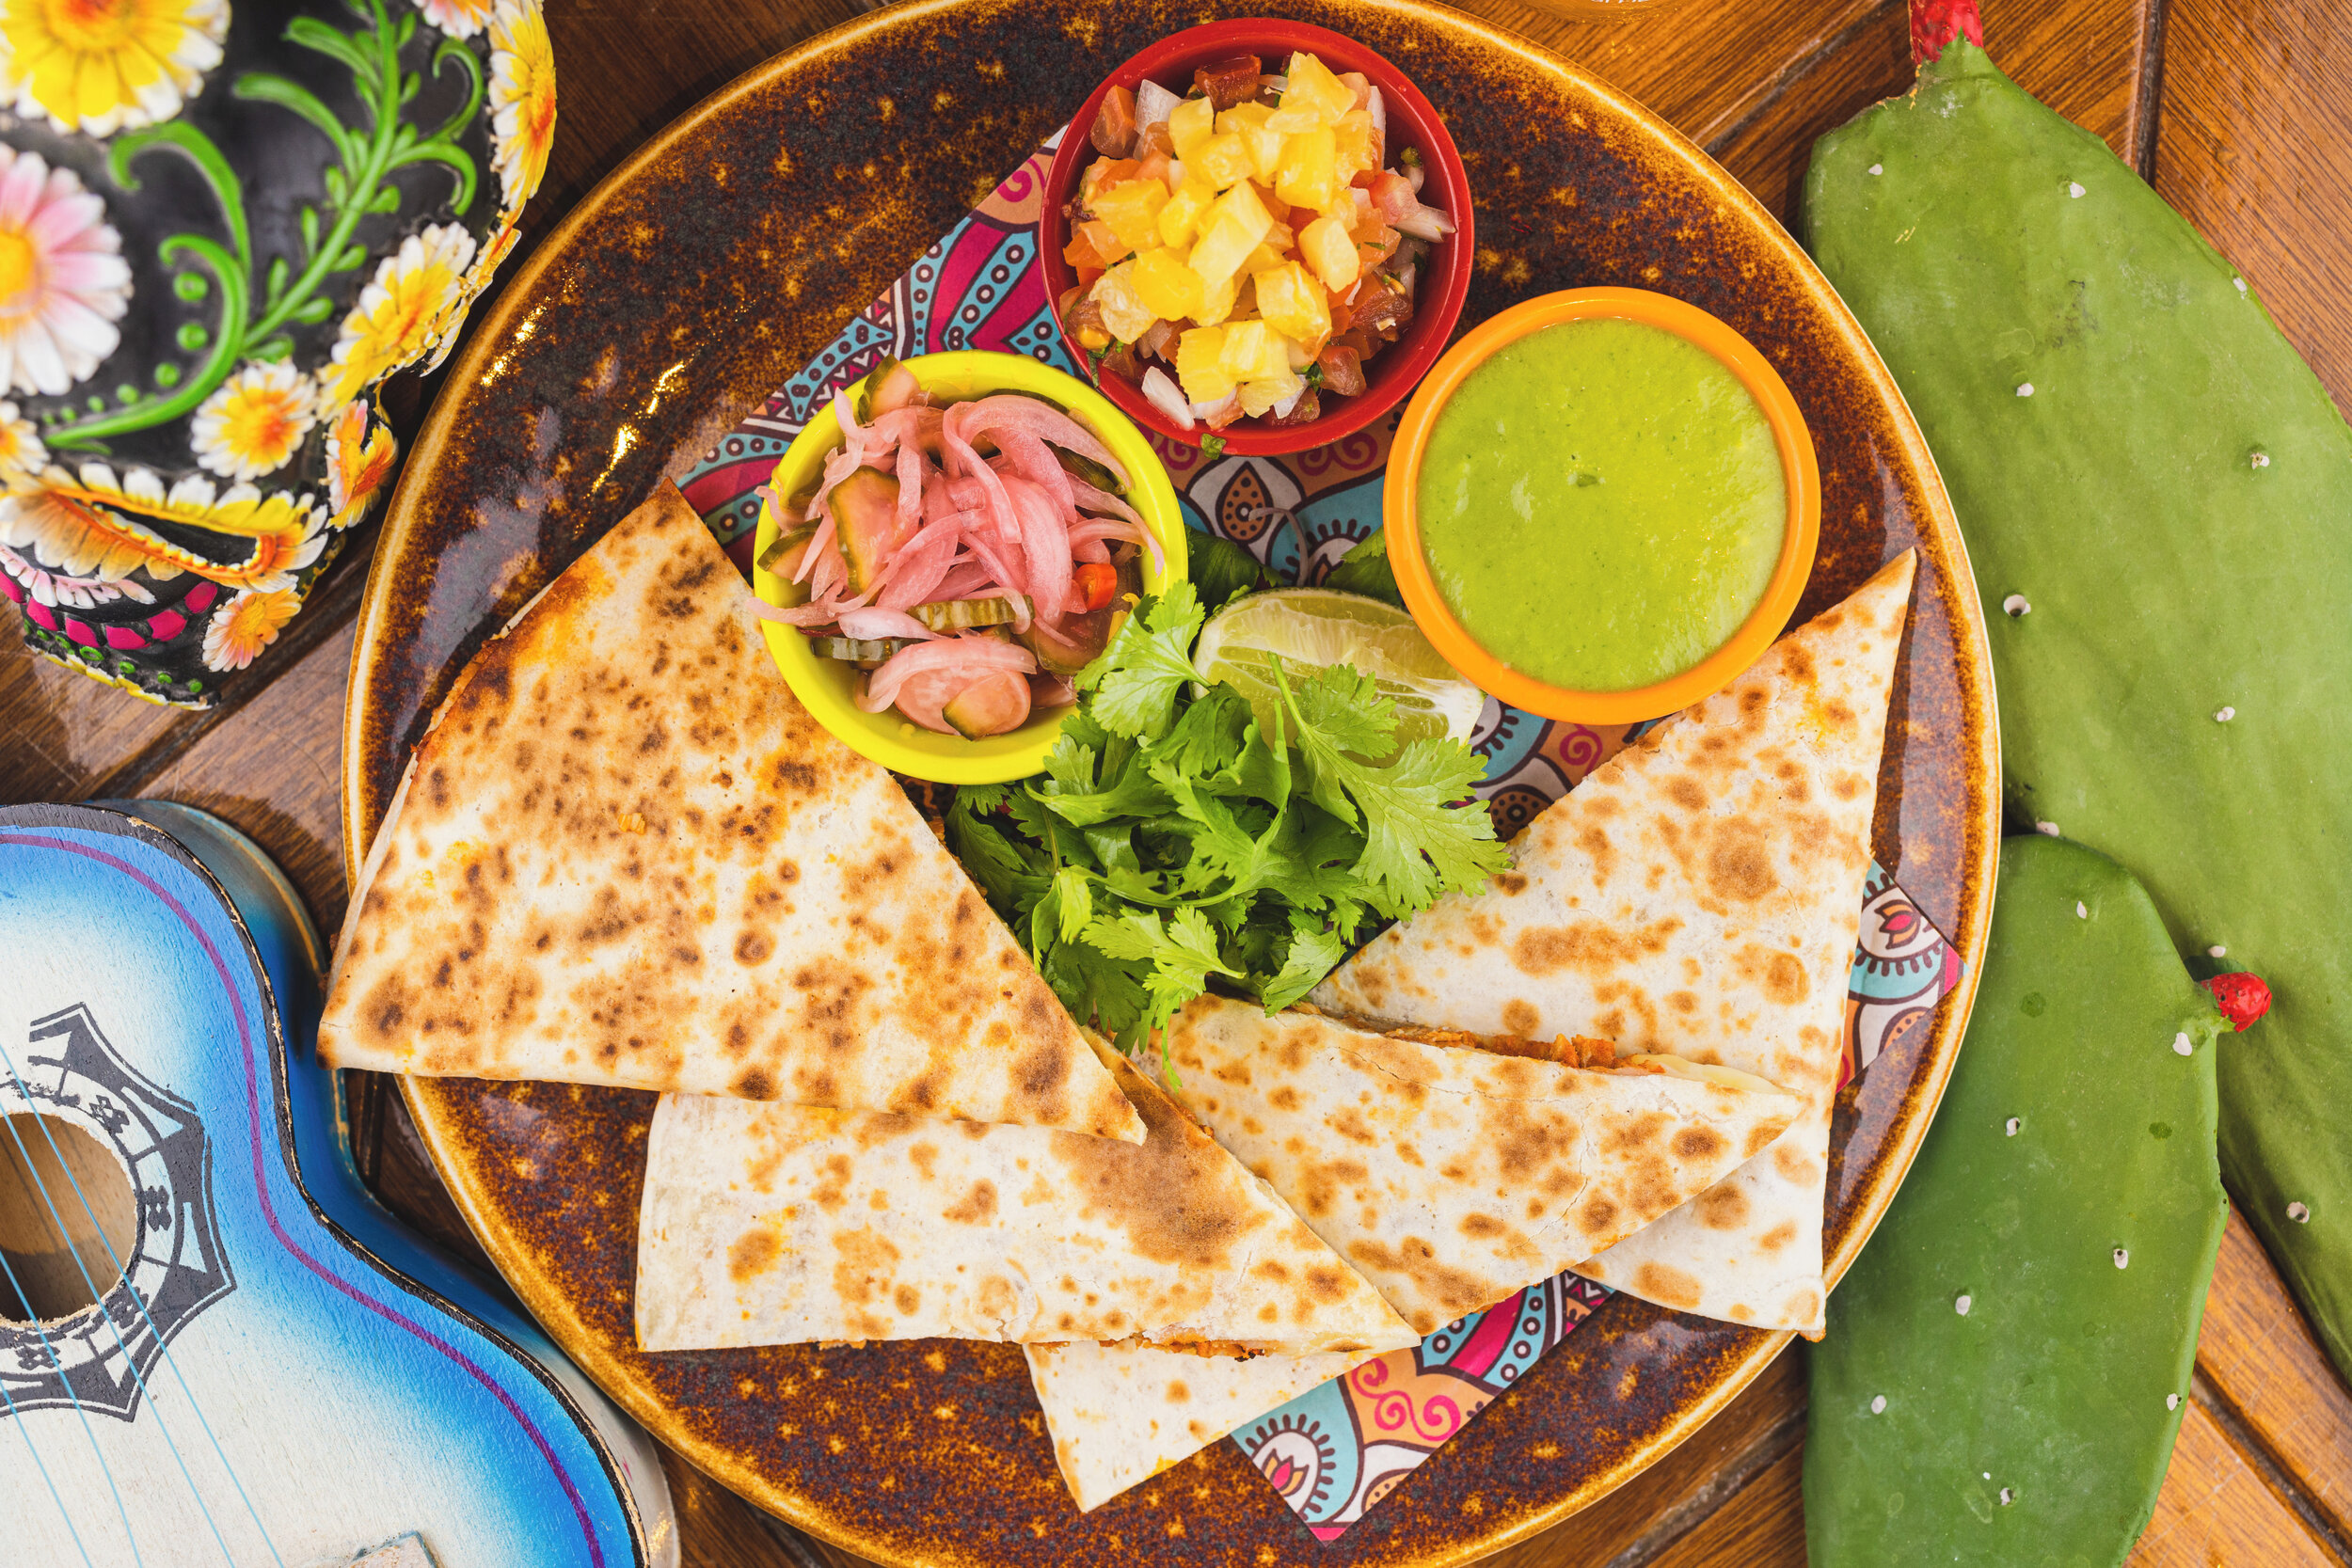 Why not try our La Gringa @elchapostacosdxb 💃⁣
⁣
Book now⁣
📩eat@elchapostaco.com⁣
⁣
#lagringa #elchapostacos